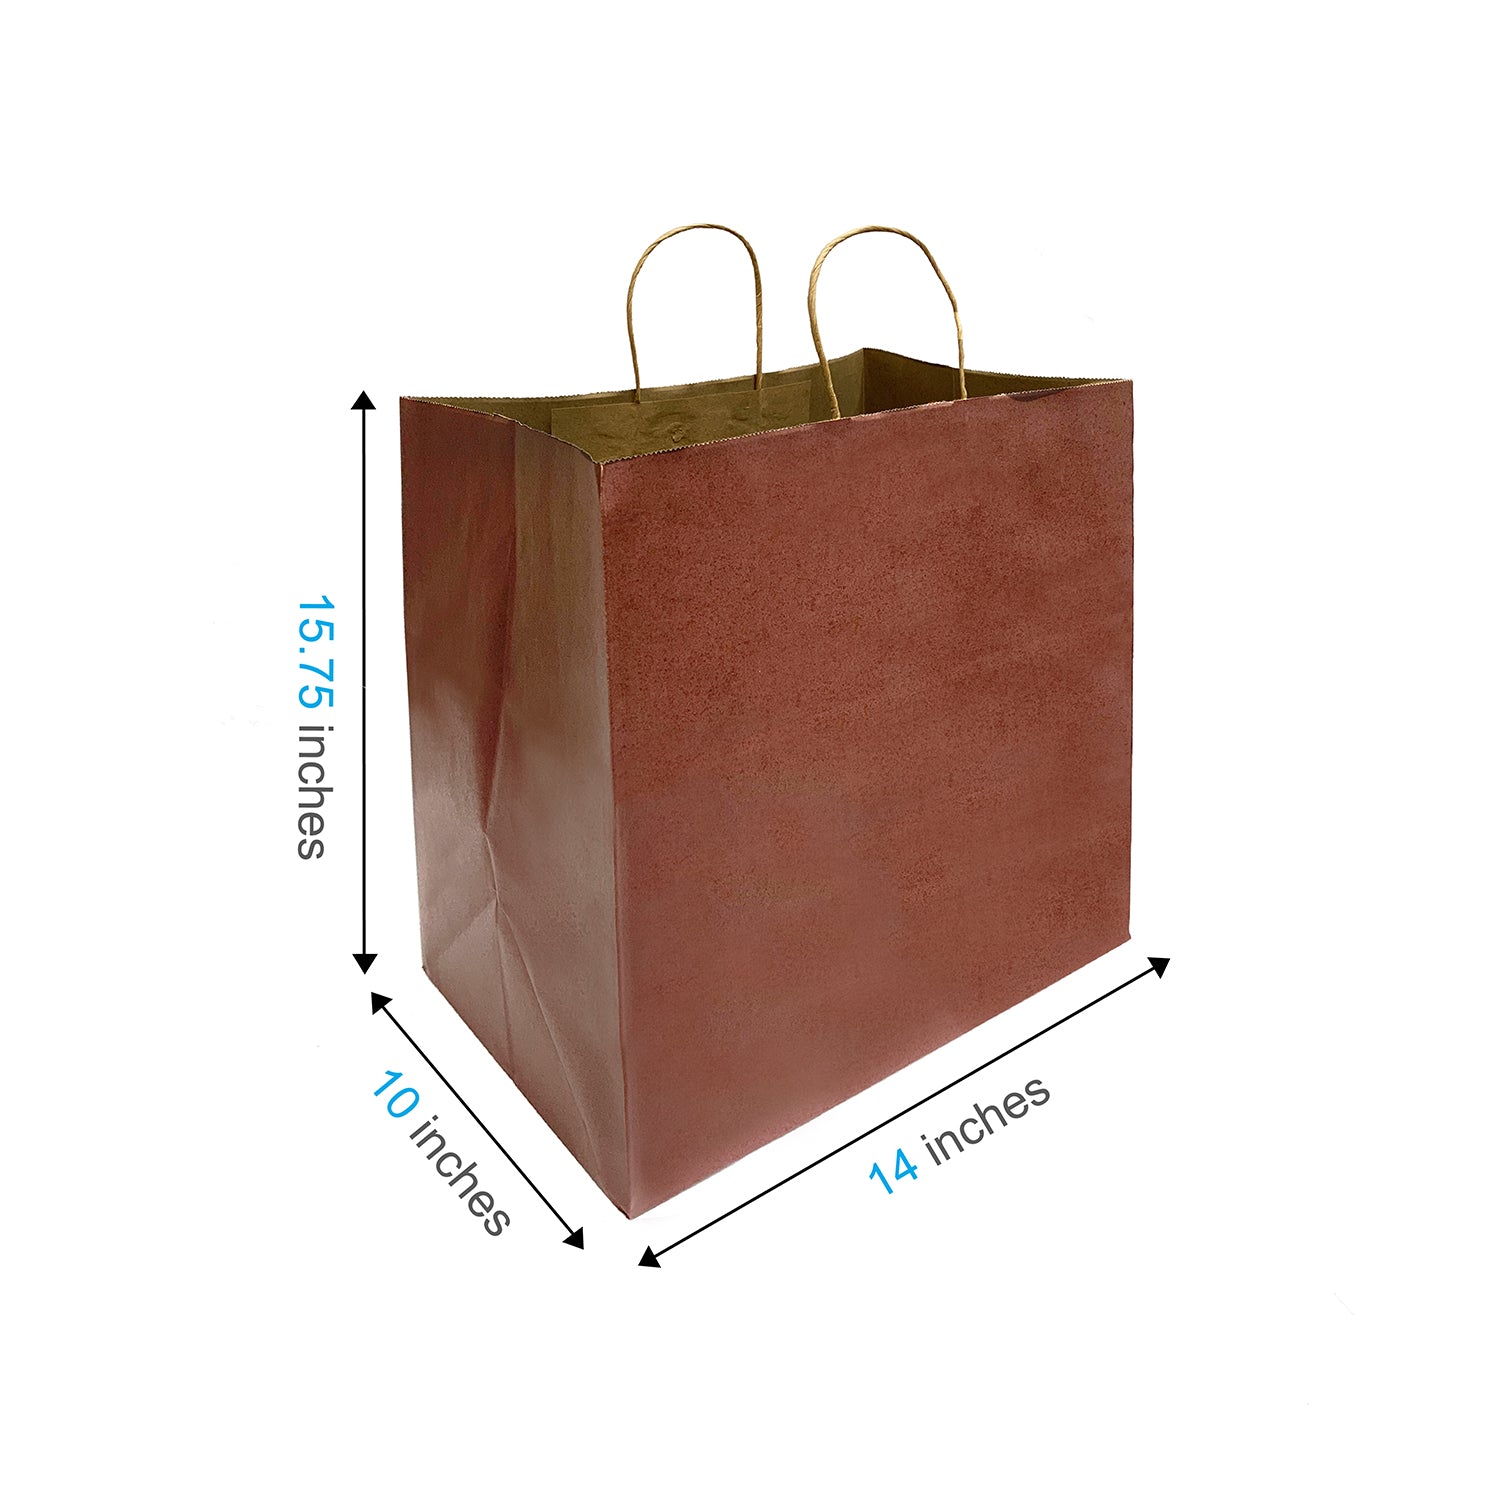 150 Pcs, Super Royal, 14x10x15.75 inches, Chocolate Kraft Paper Bags, with Twisted Handle